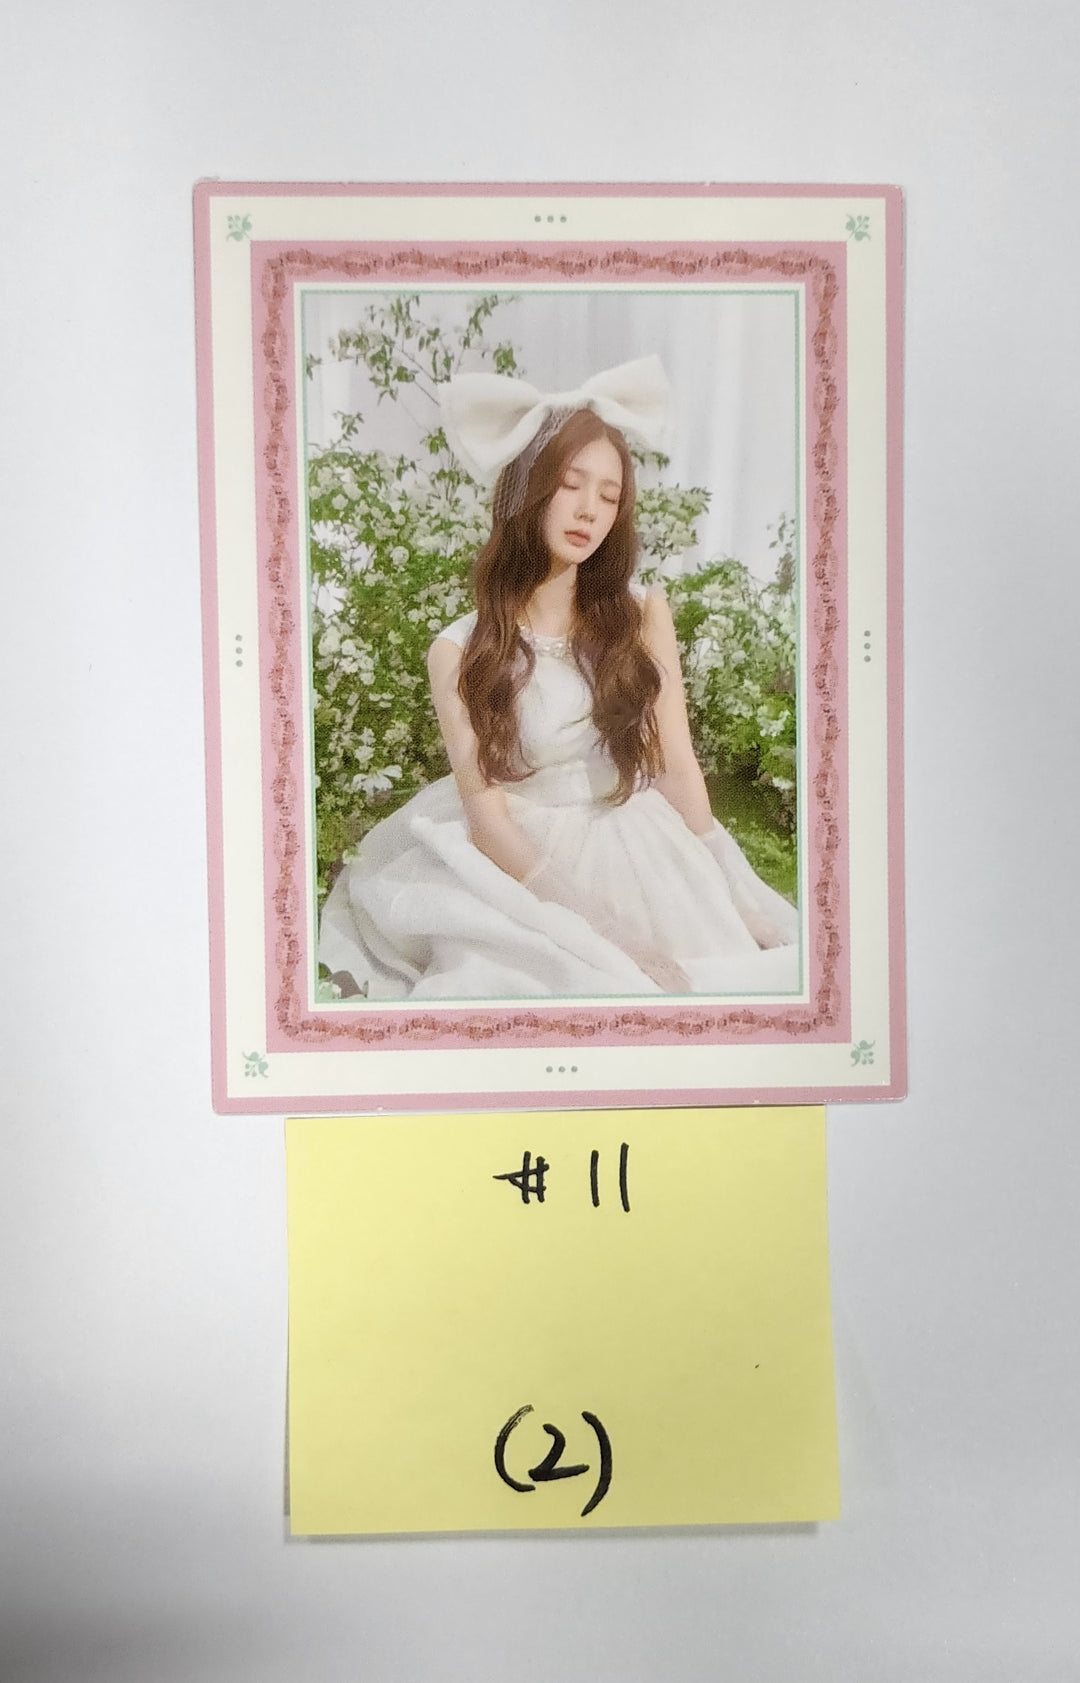 MIYEON [Of (g) I-DLE] "MY" 1st - Official Photocard, Book Mark, Lenticular card